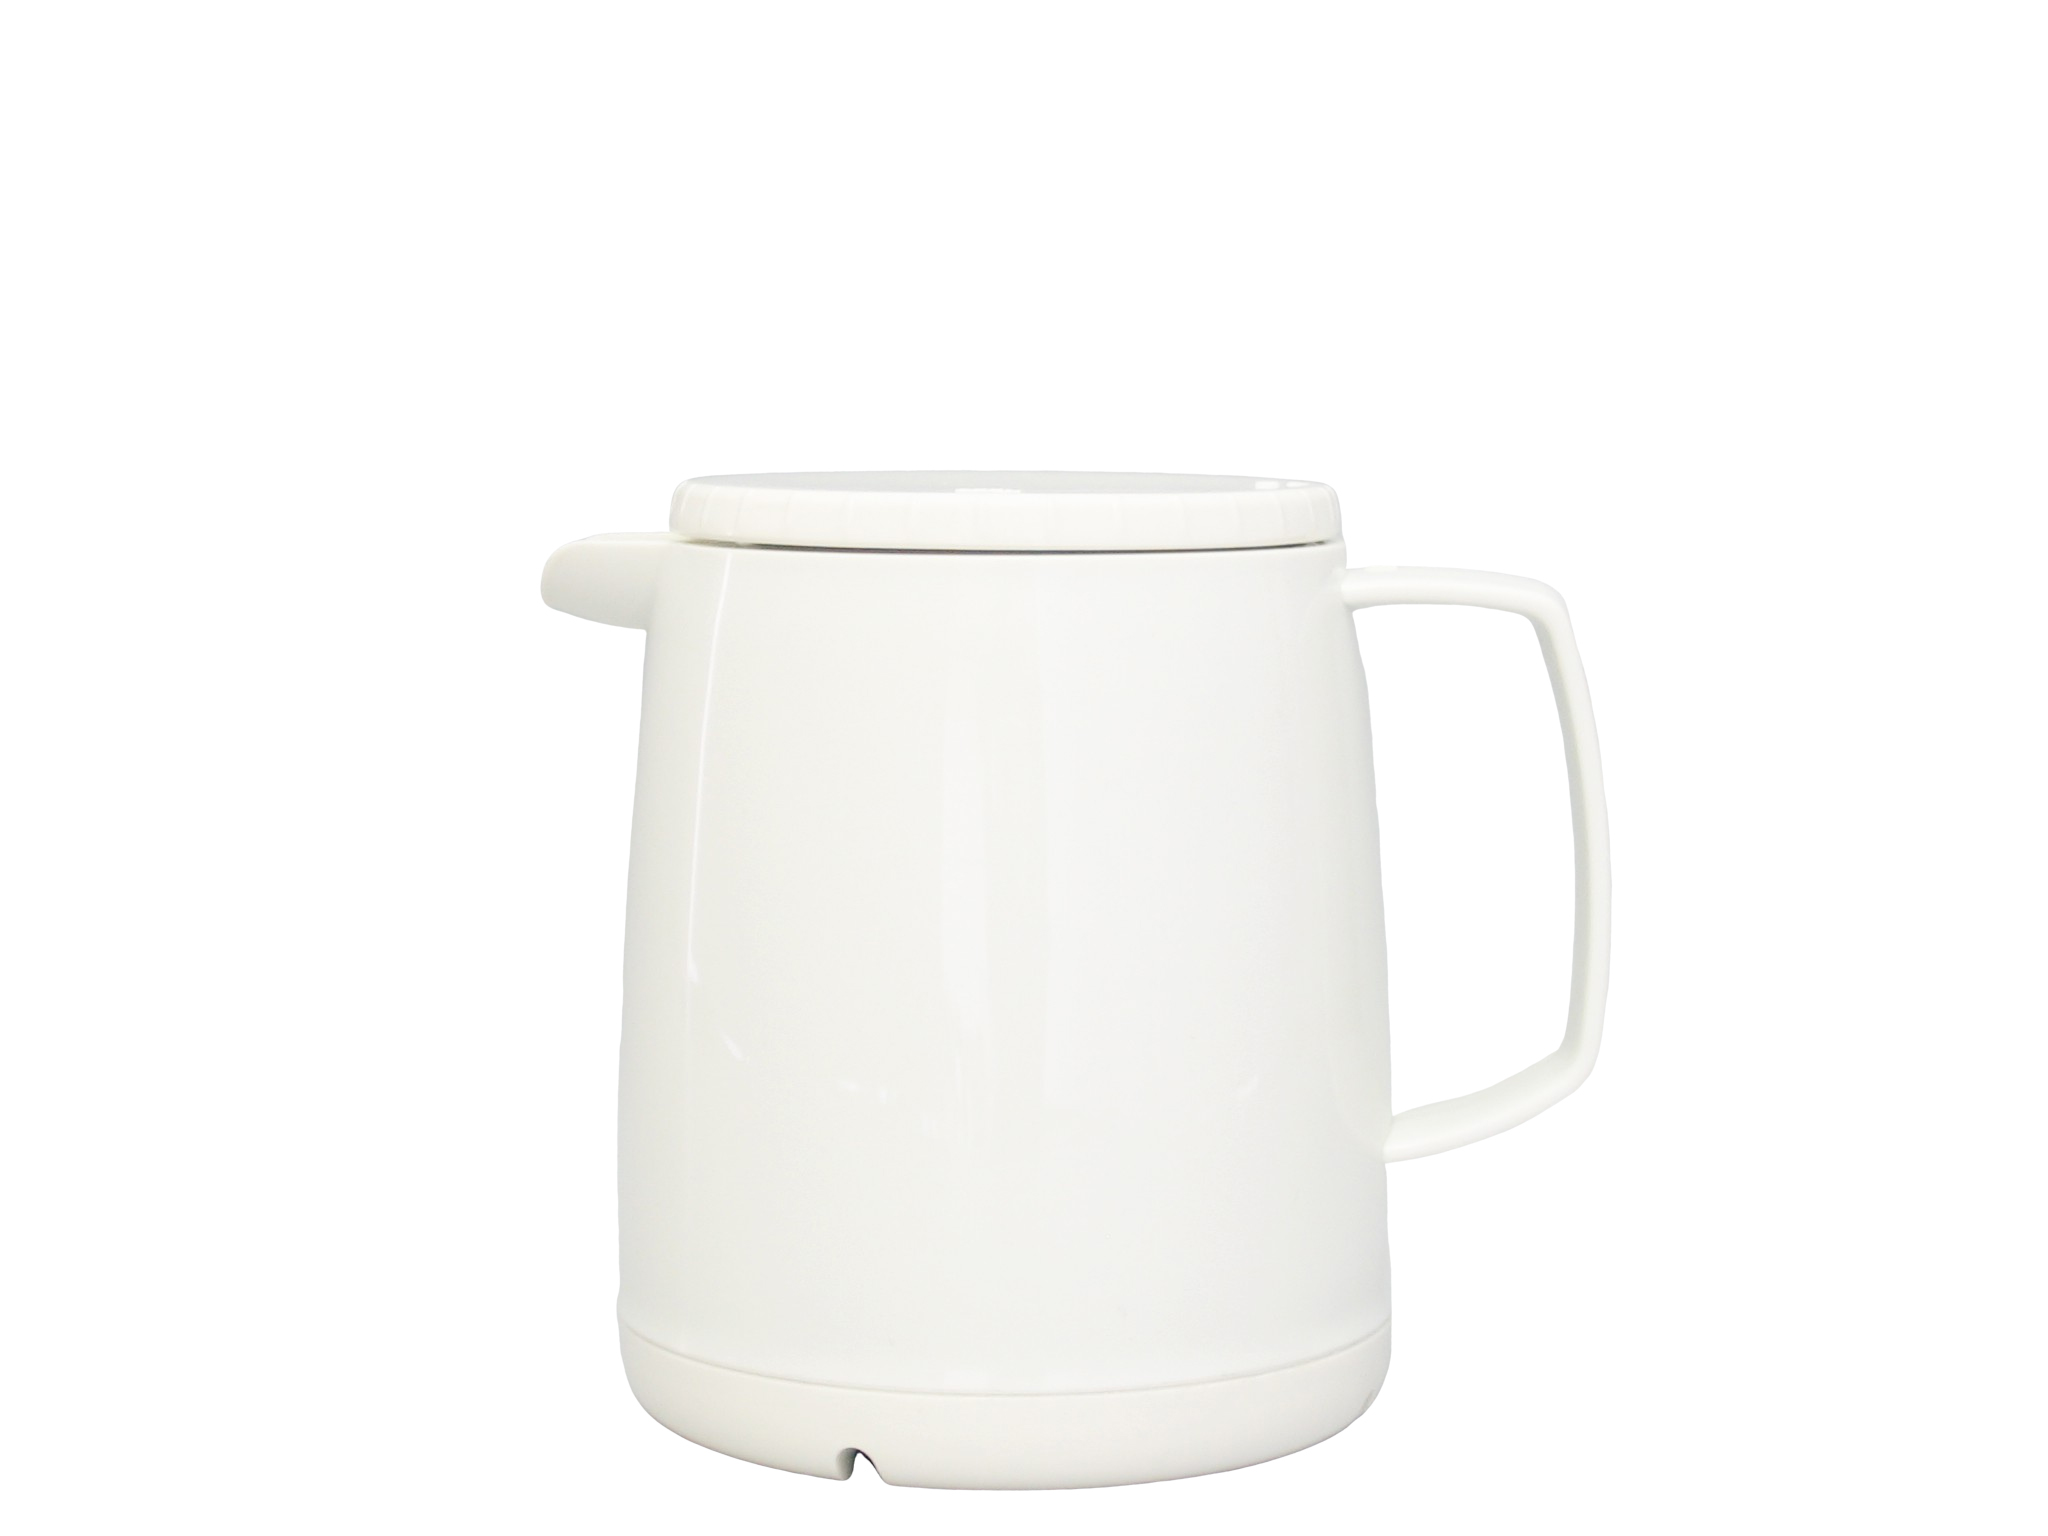 JAZZ050-001 - Insulated carafe stackable white 0.50 L - Isobel